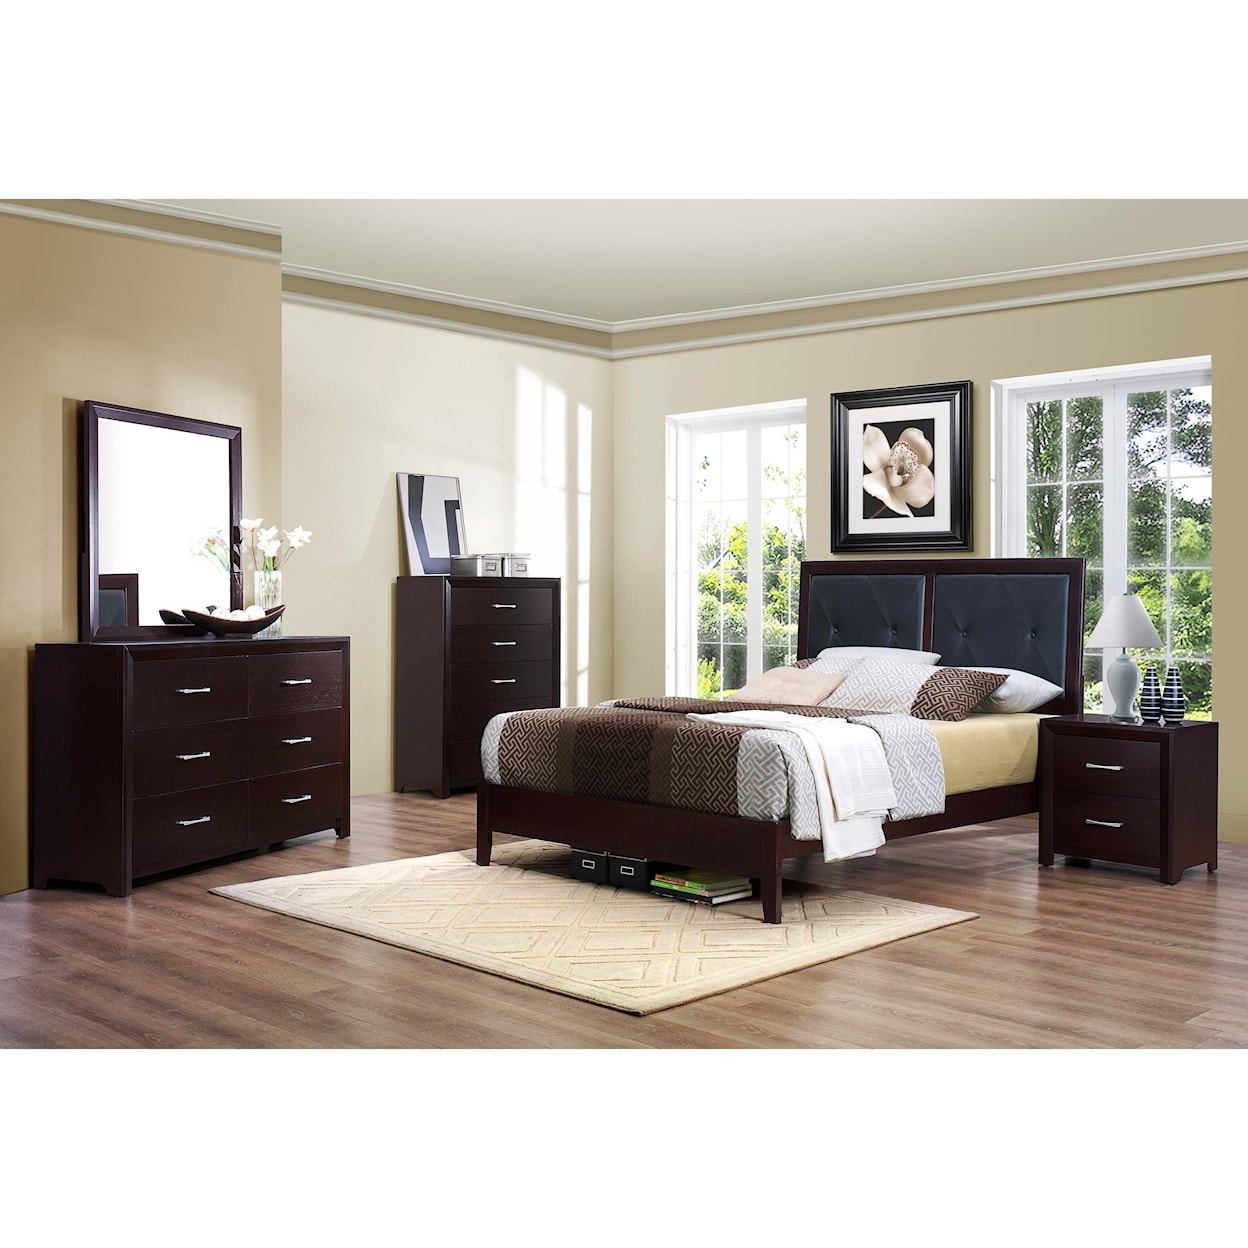 Homelegance Edina Full Bedroom Group without Chest